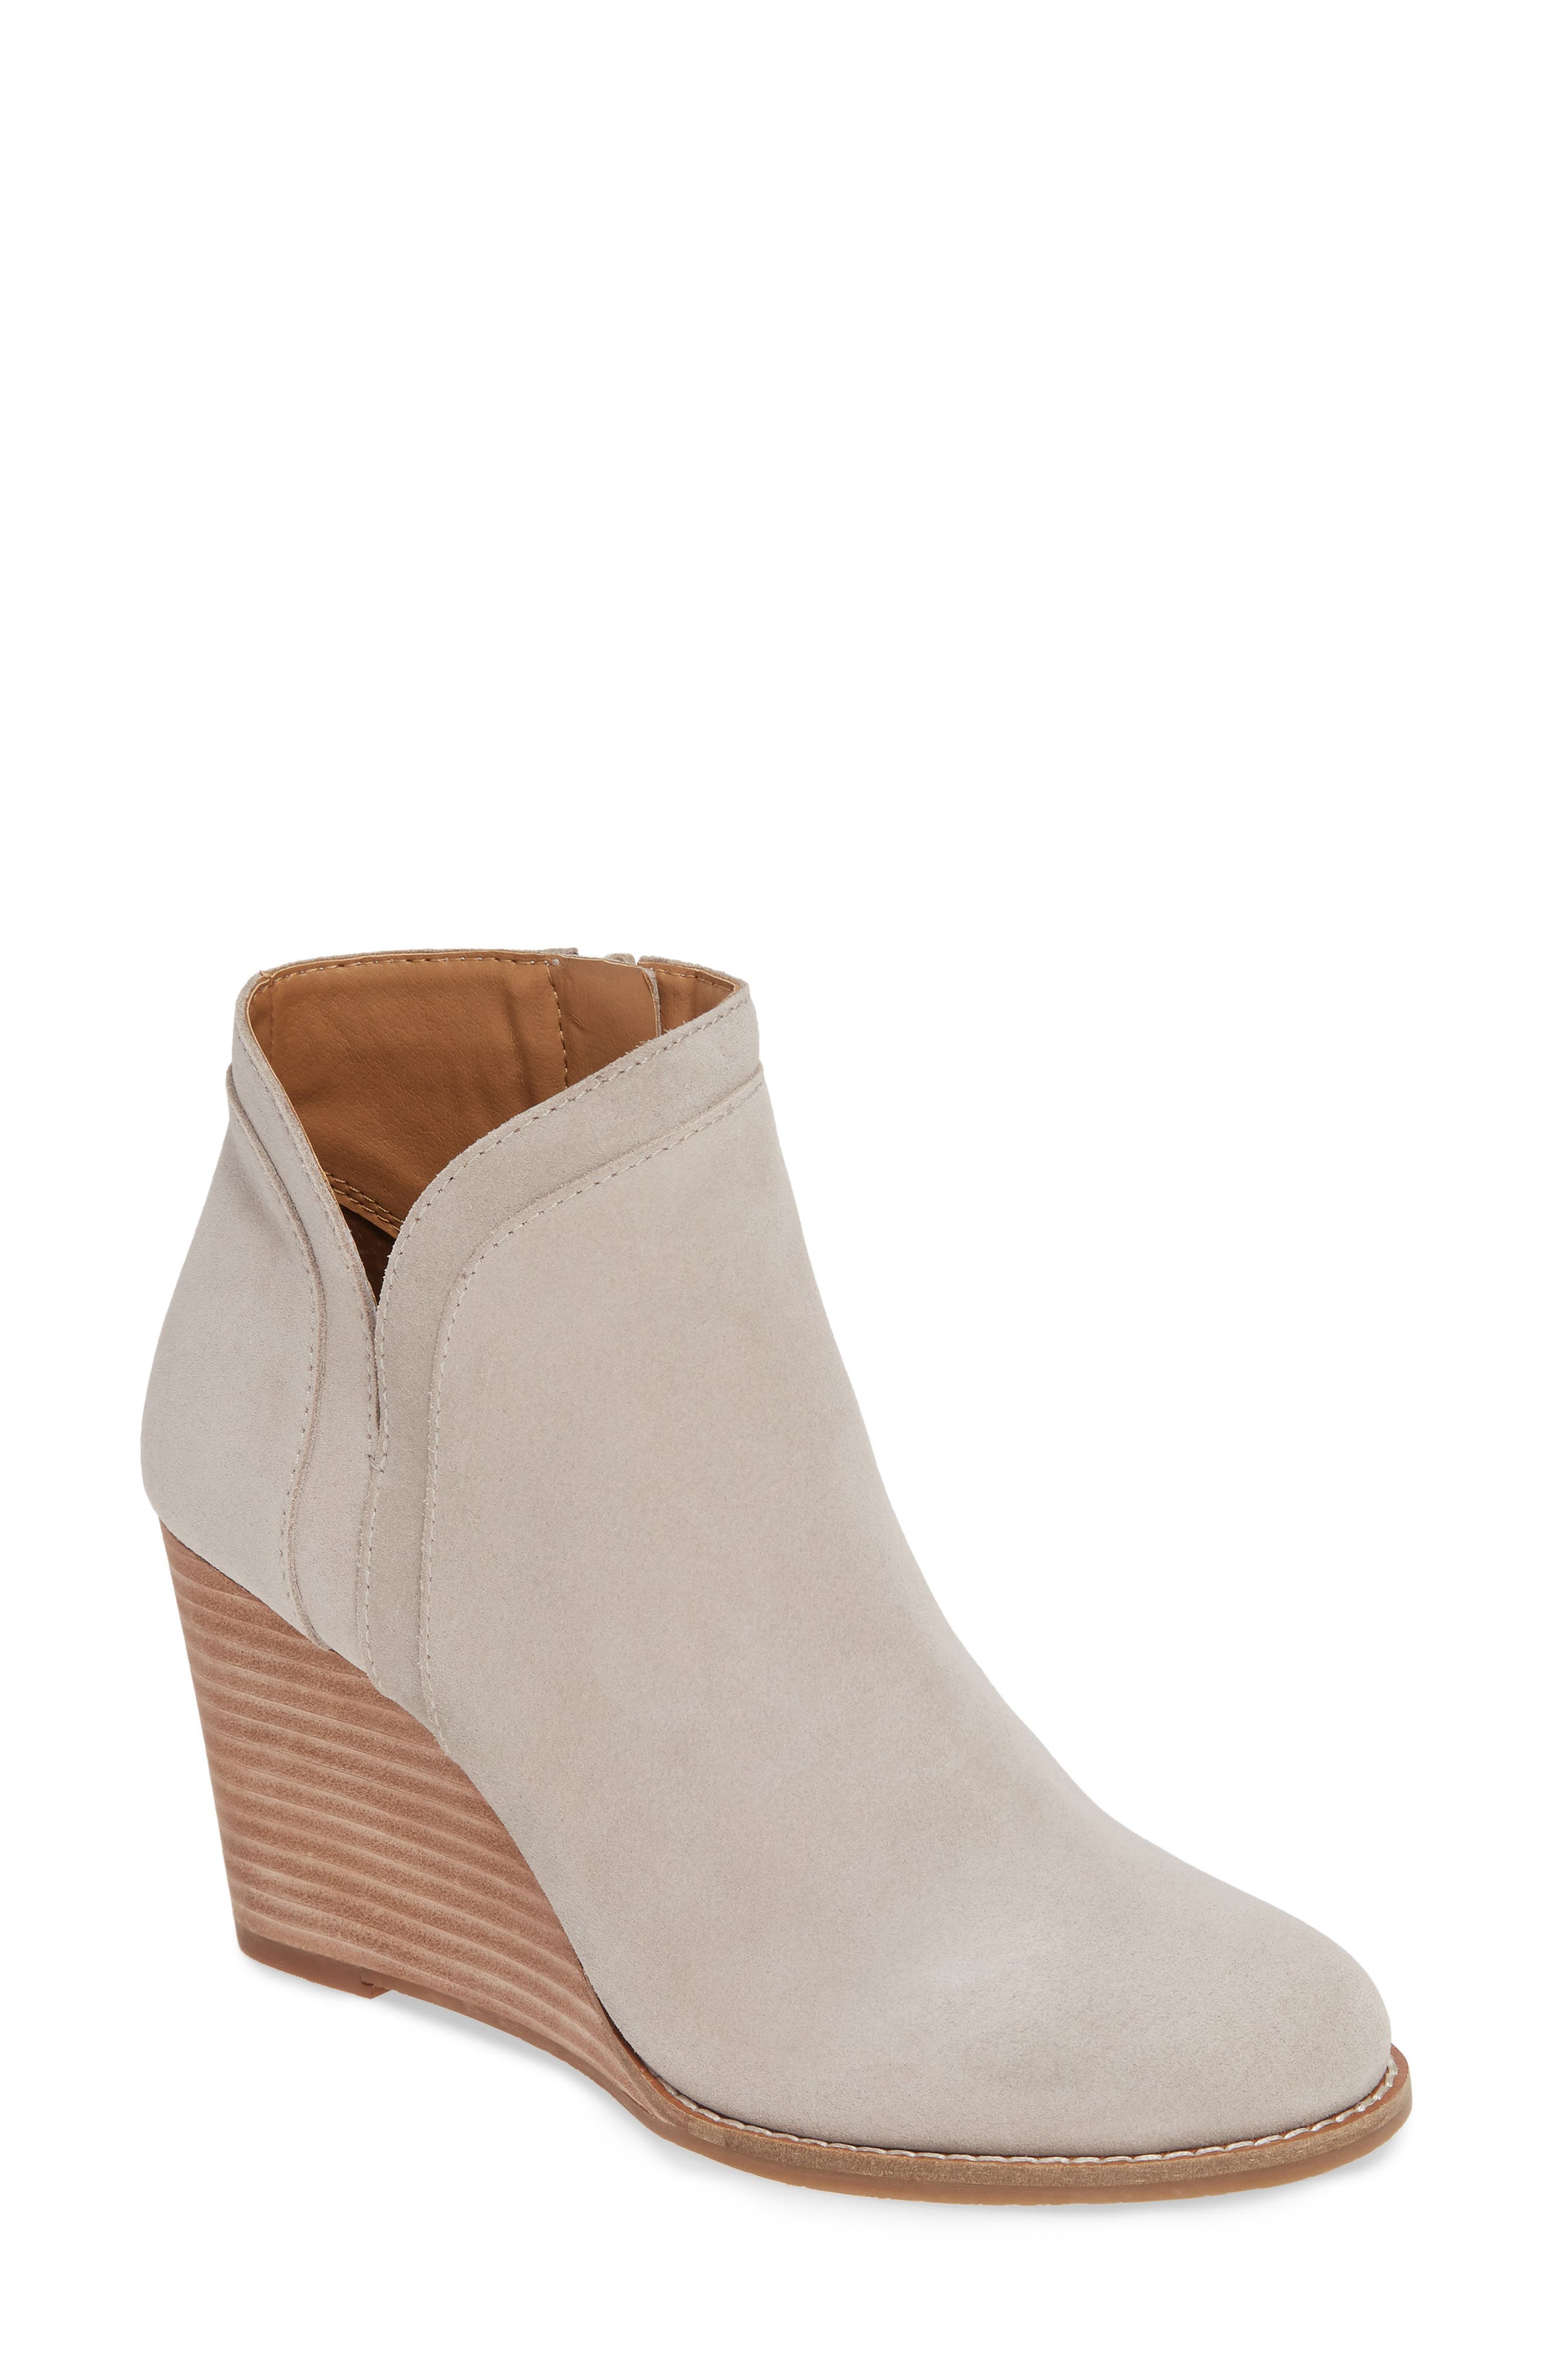 lucky brand pink booties